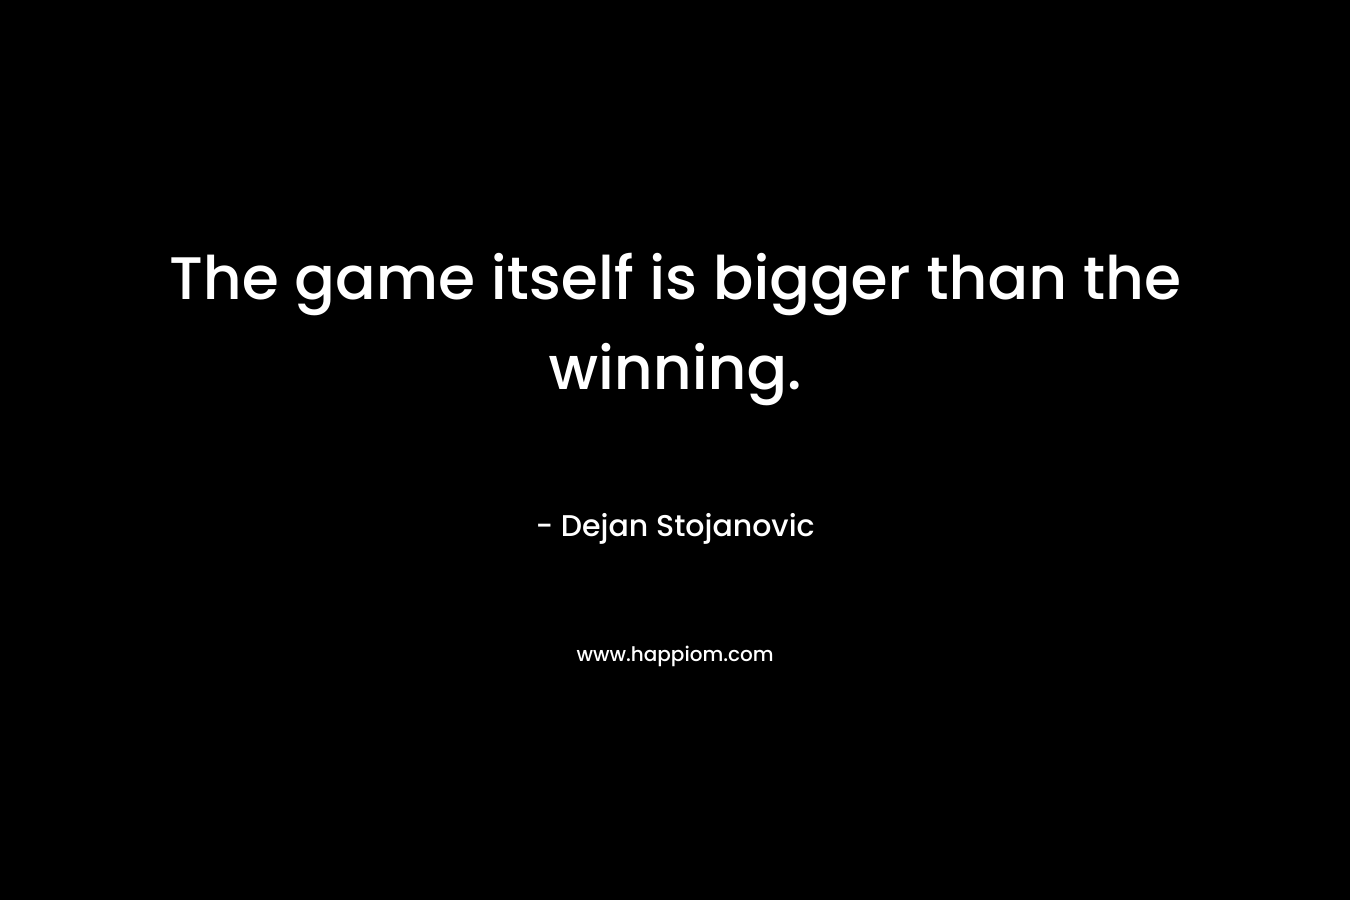 The game itself is bigger than the winning.